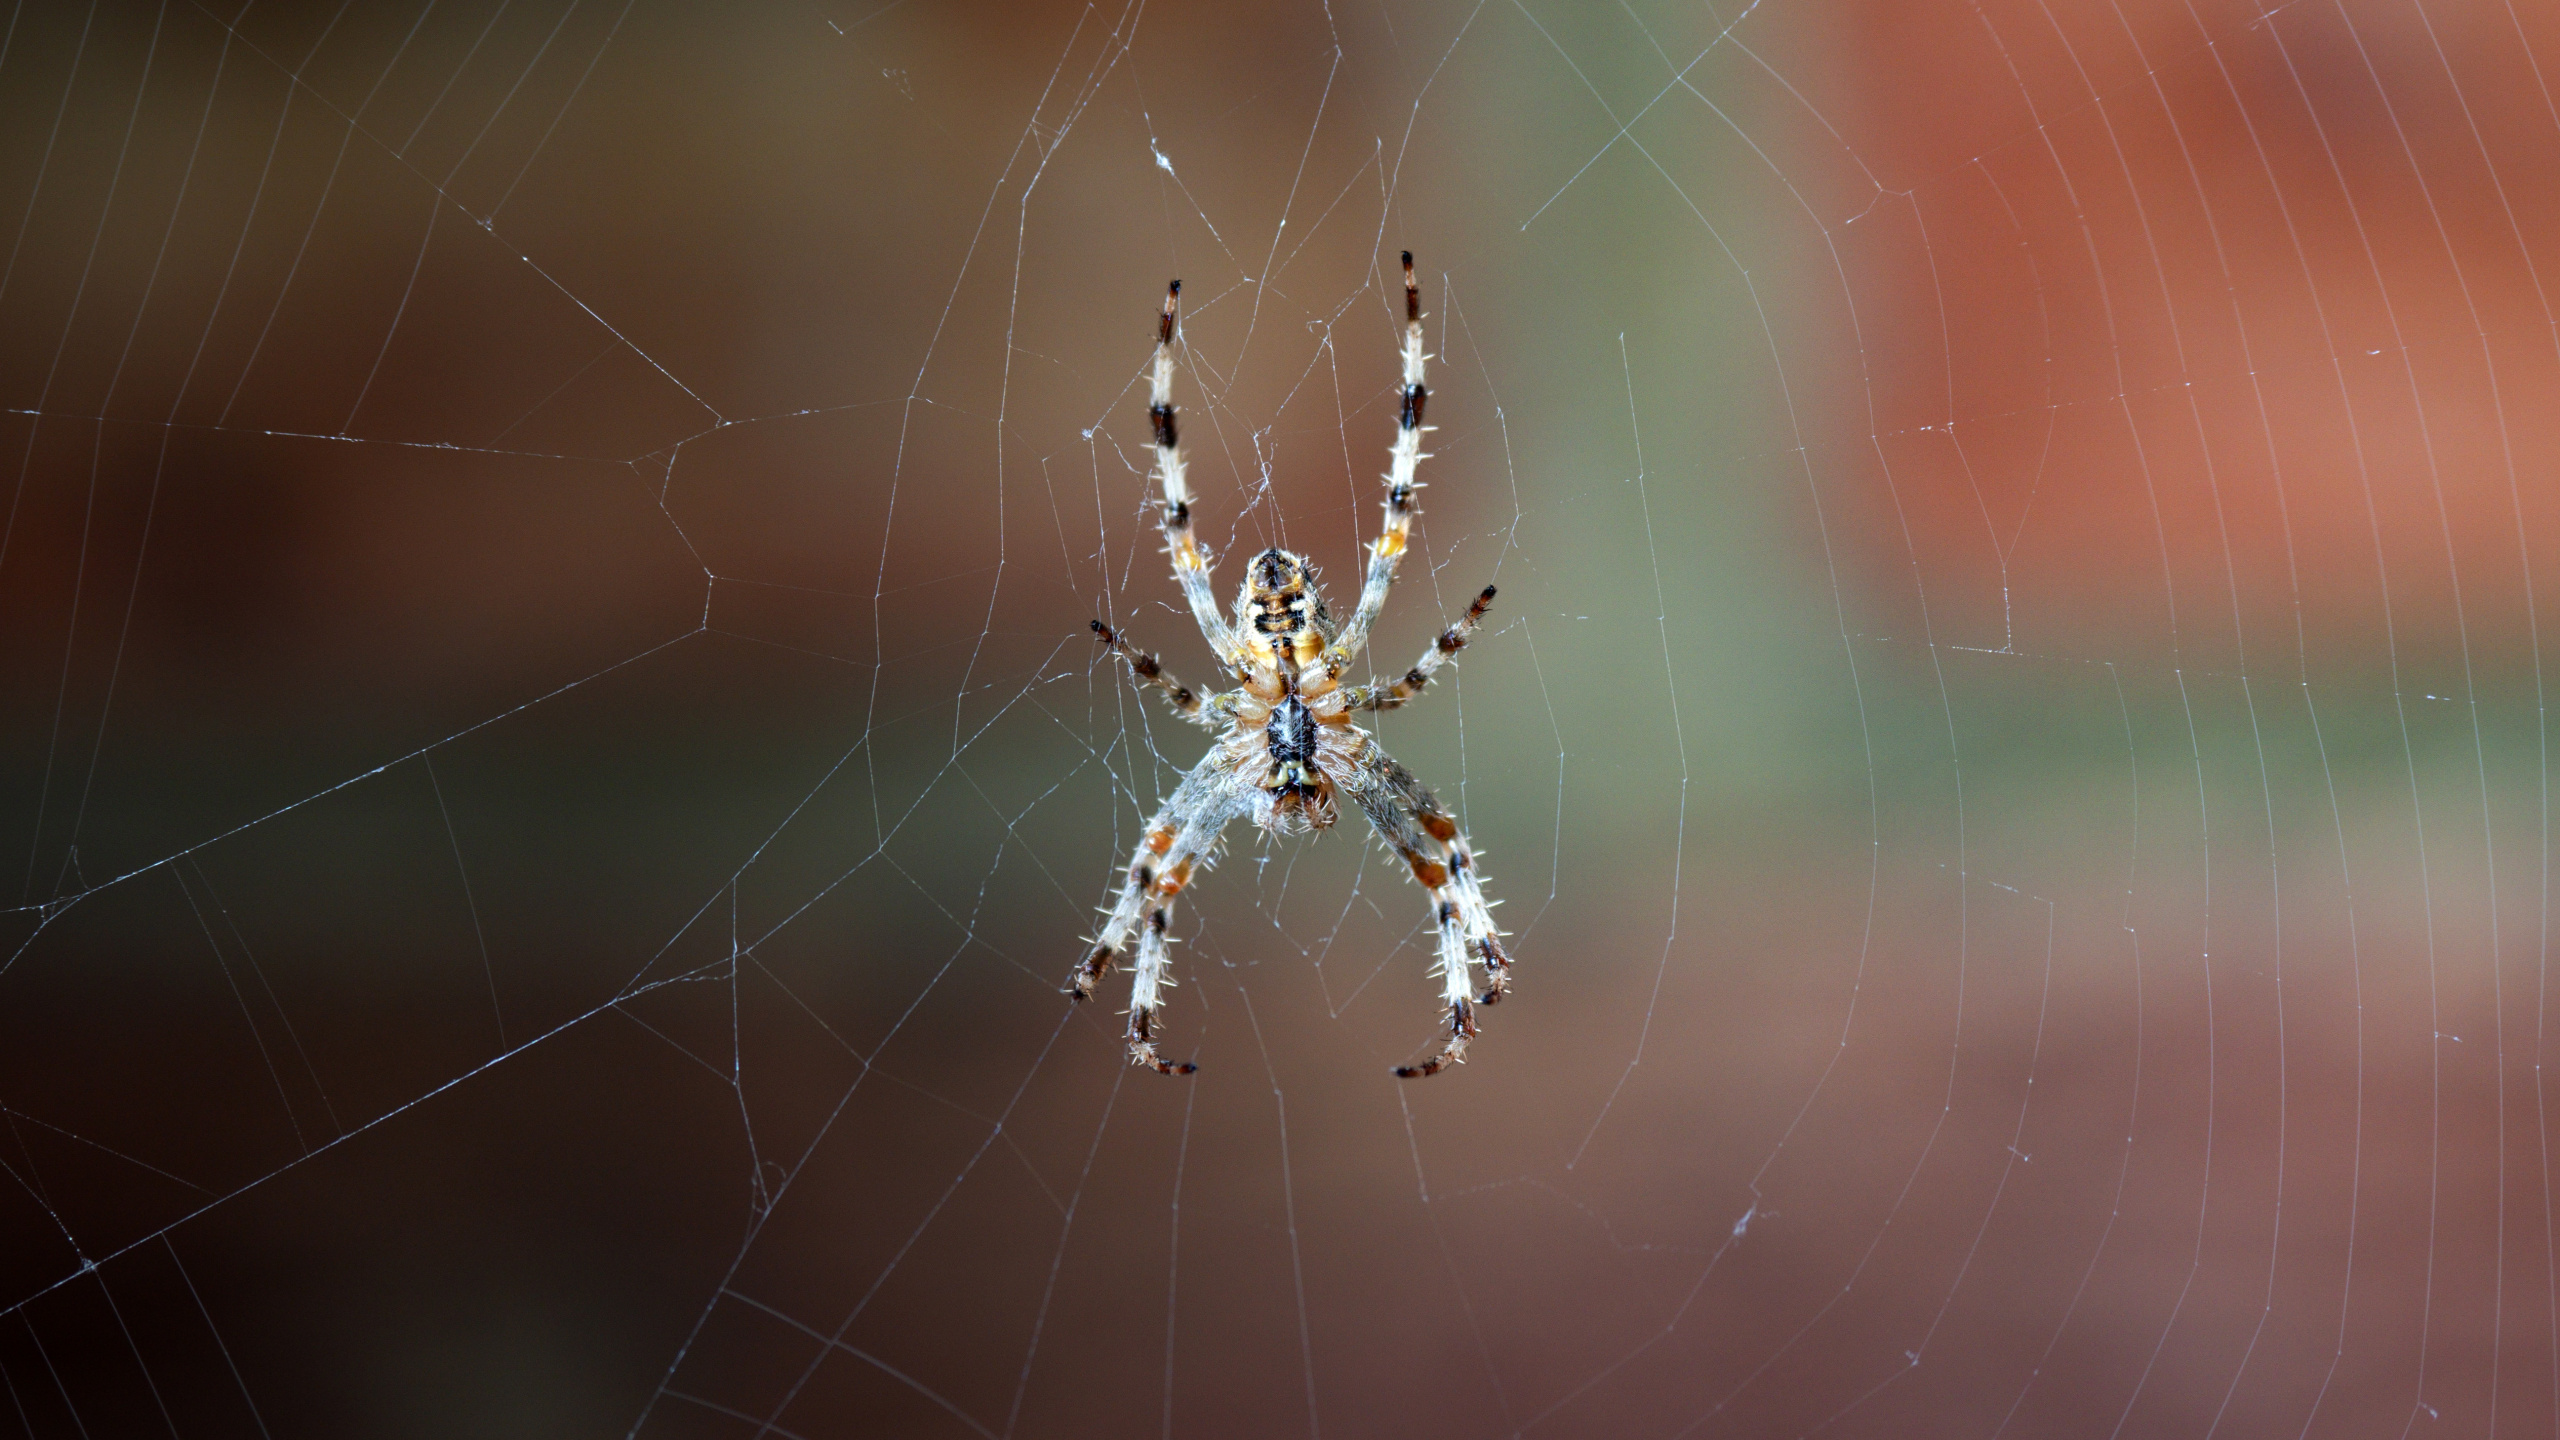 Brown and Black Spider on Web in Close up Photography During Daytime. Wallpaper in 2560x1440 Resolution